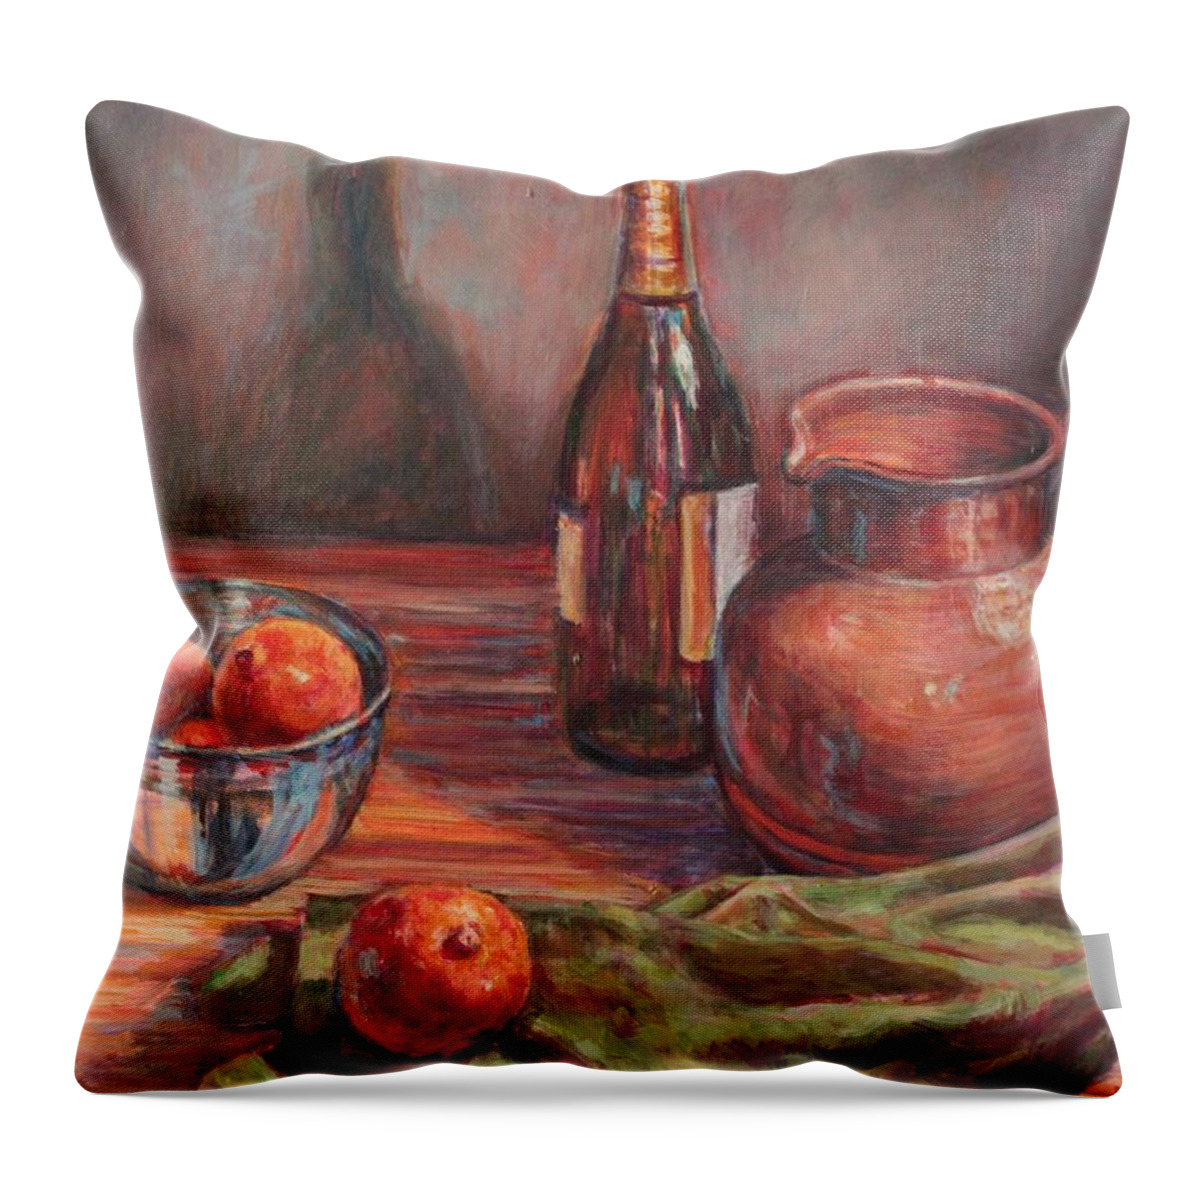 Still Life On Table Setting Throw Pillow featuring the painting Still Life With Oranges by Veronica Cassell vaz